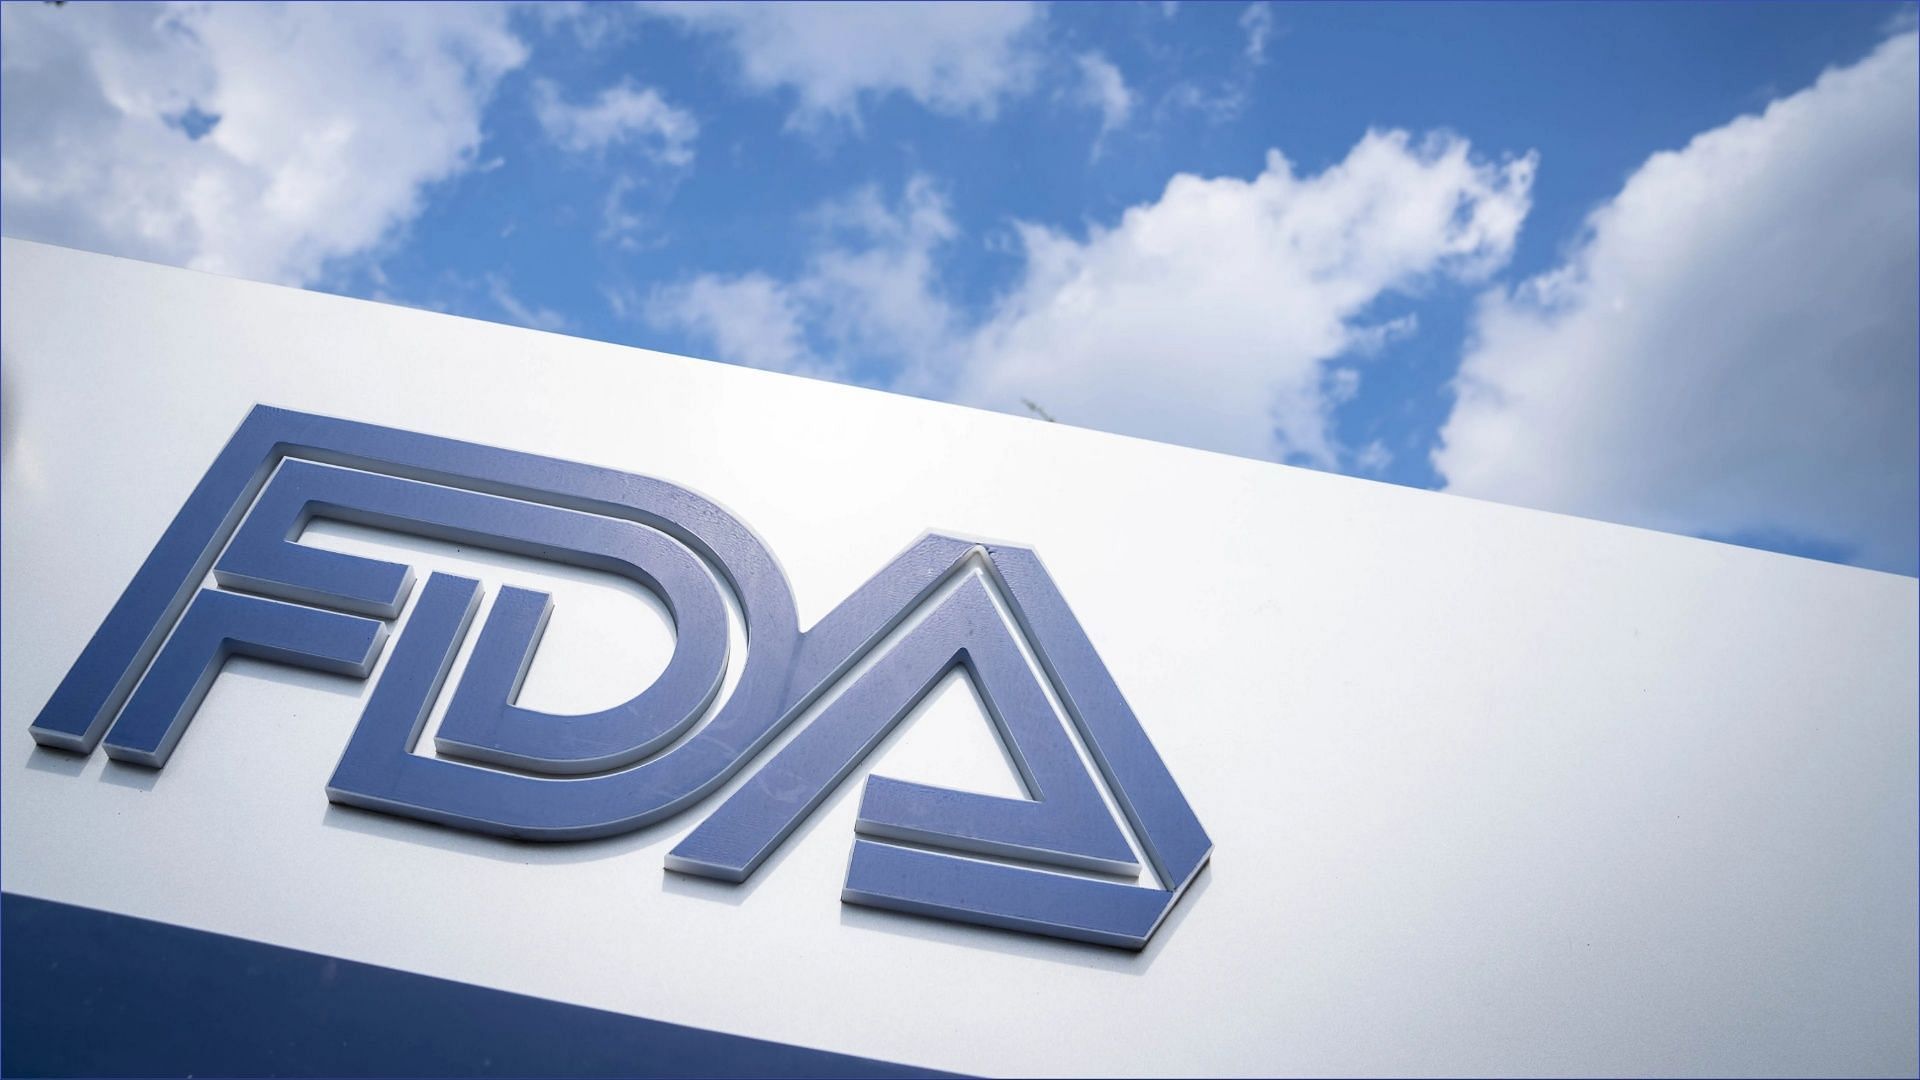 Inmar Supply Chain Solutions, LLC recalls several FDA-regulated products over contamination risks (Image via Sarah Silbiger / Getty Images)